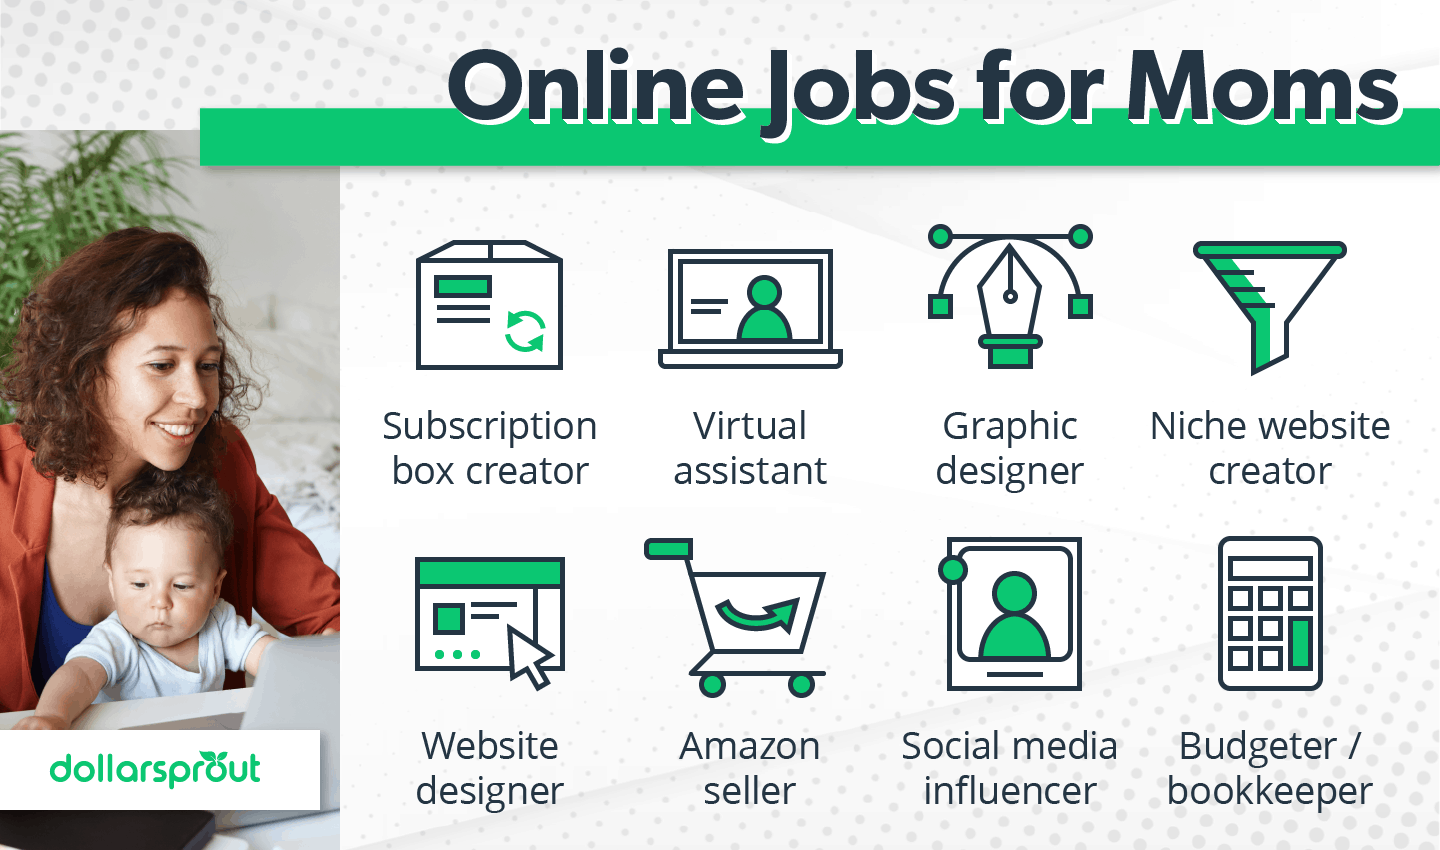 8 to 2 jobs for moms online